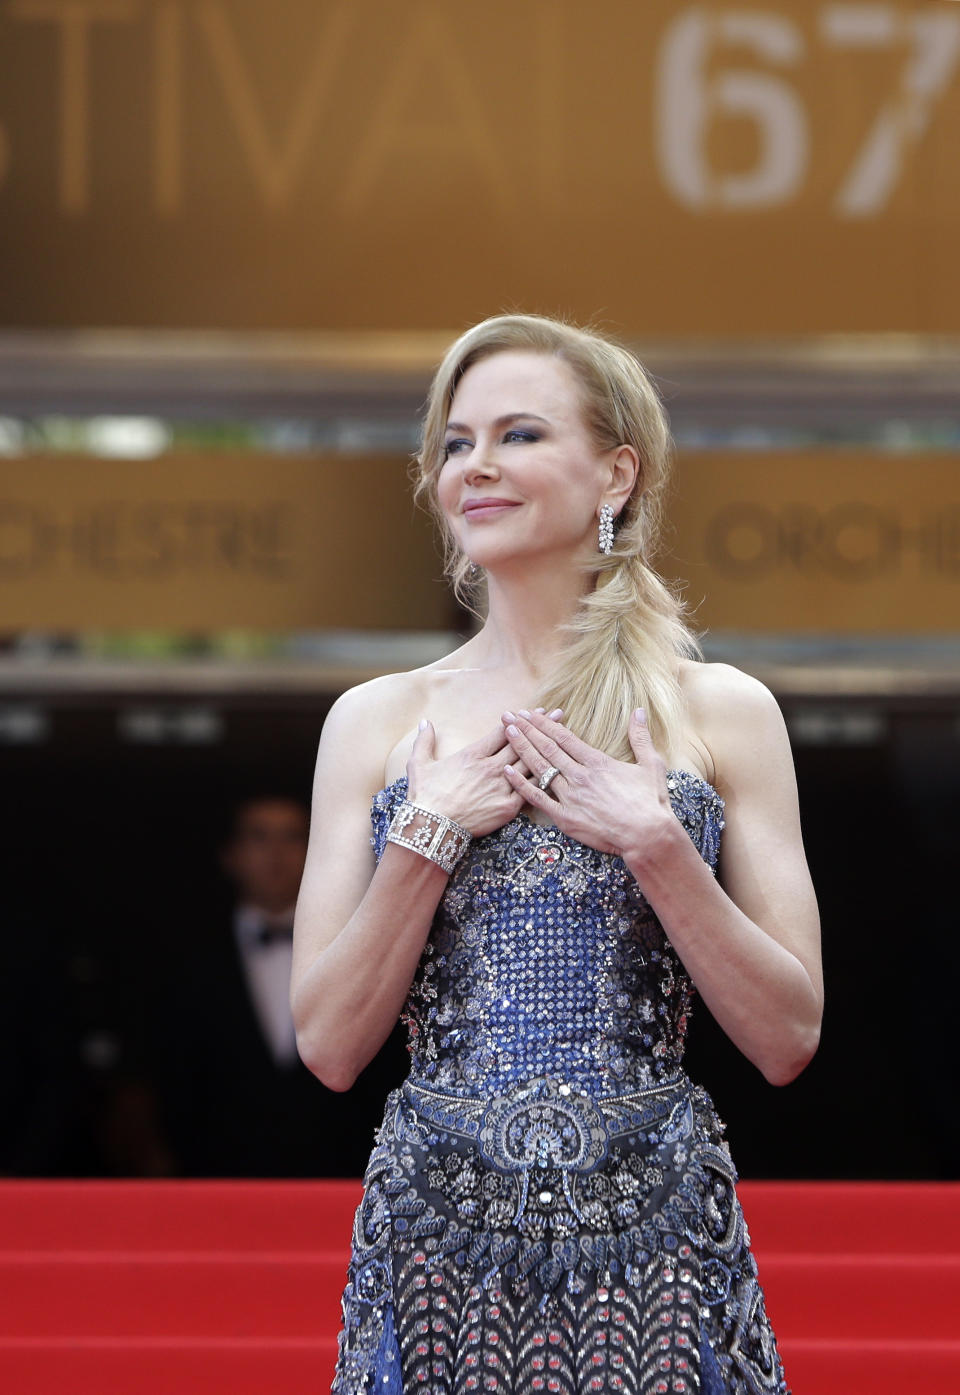 Actress Nicole Kidman stands at the top of the red carpet as she arrives for the opening ceremony and screening of Grace of Monaco at the 67th international film festival, Cannes, southern France, Wednesday, May 14, 2014. (AP Photo/Thibault Camus)